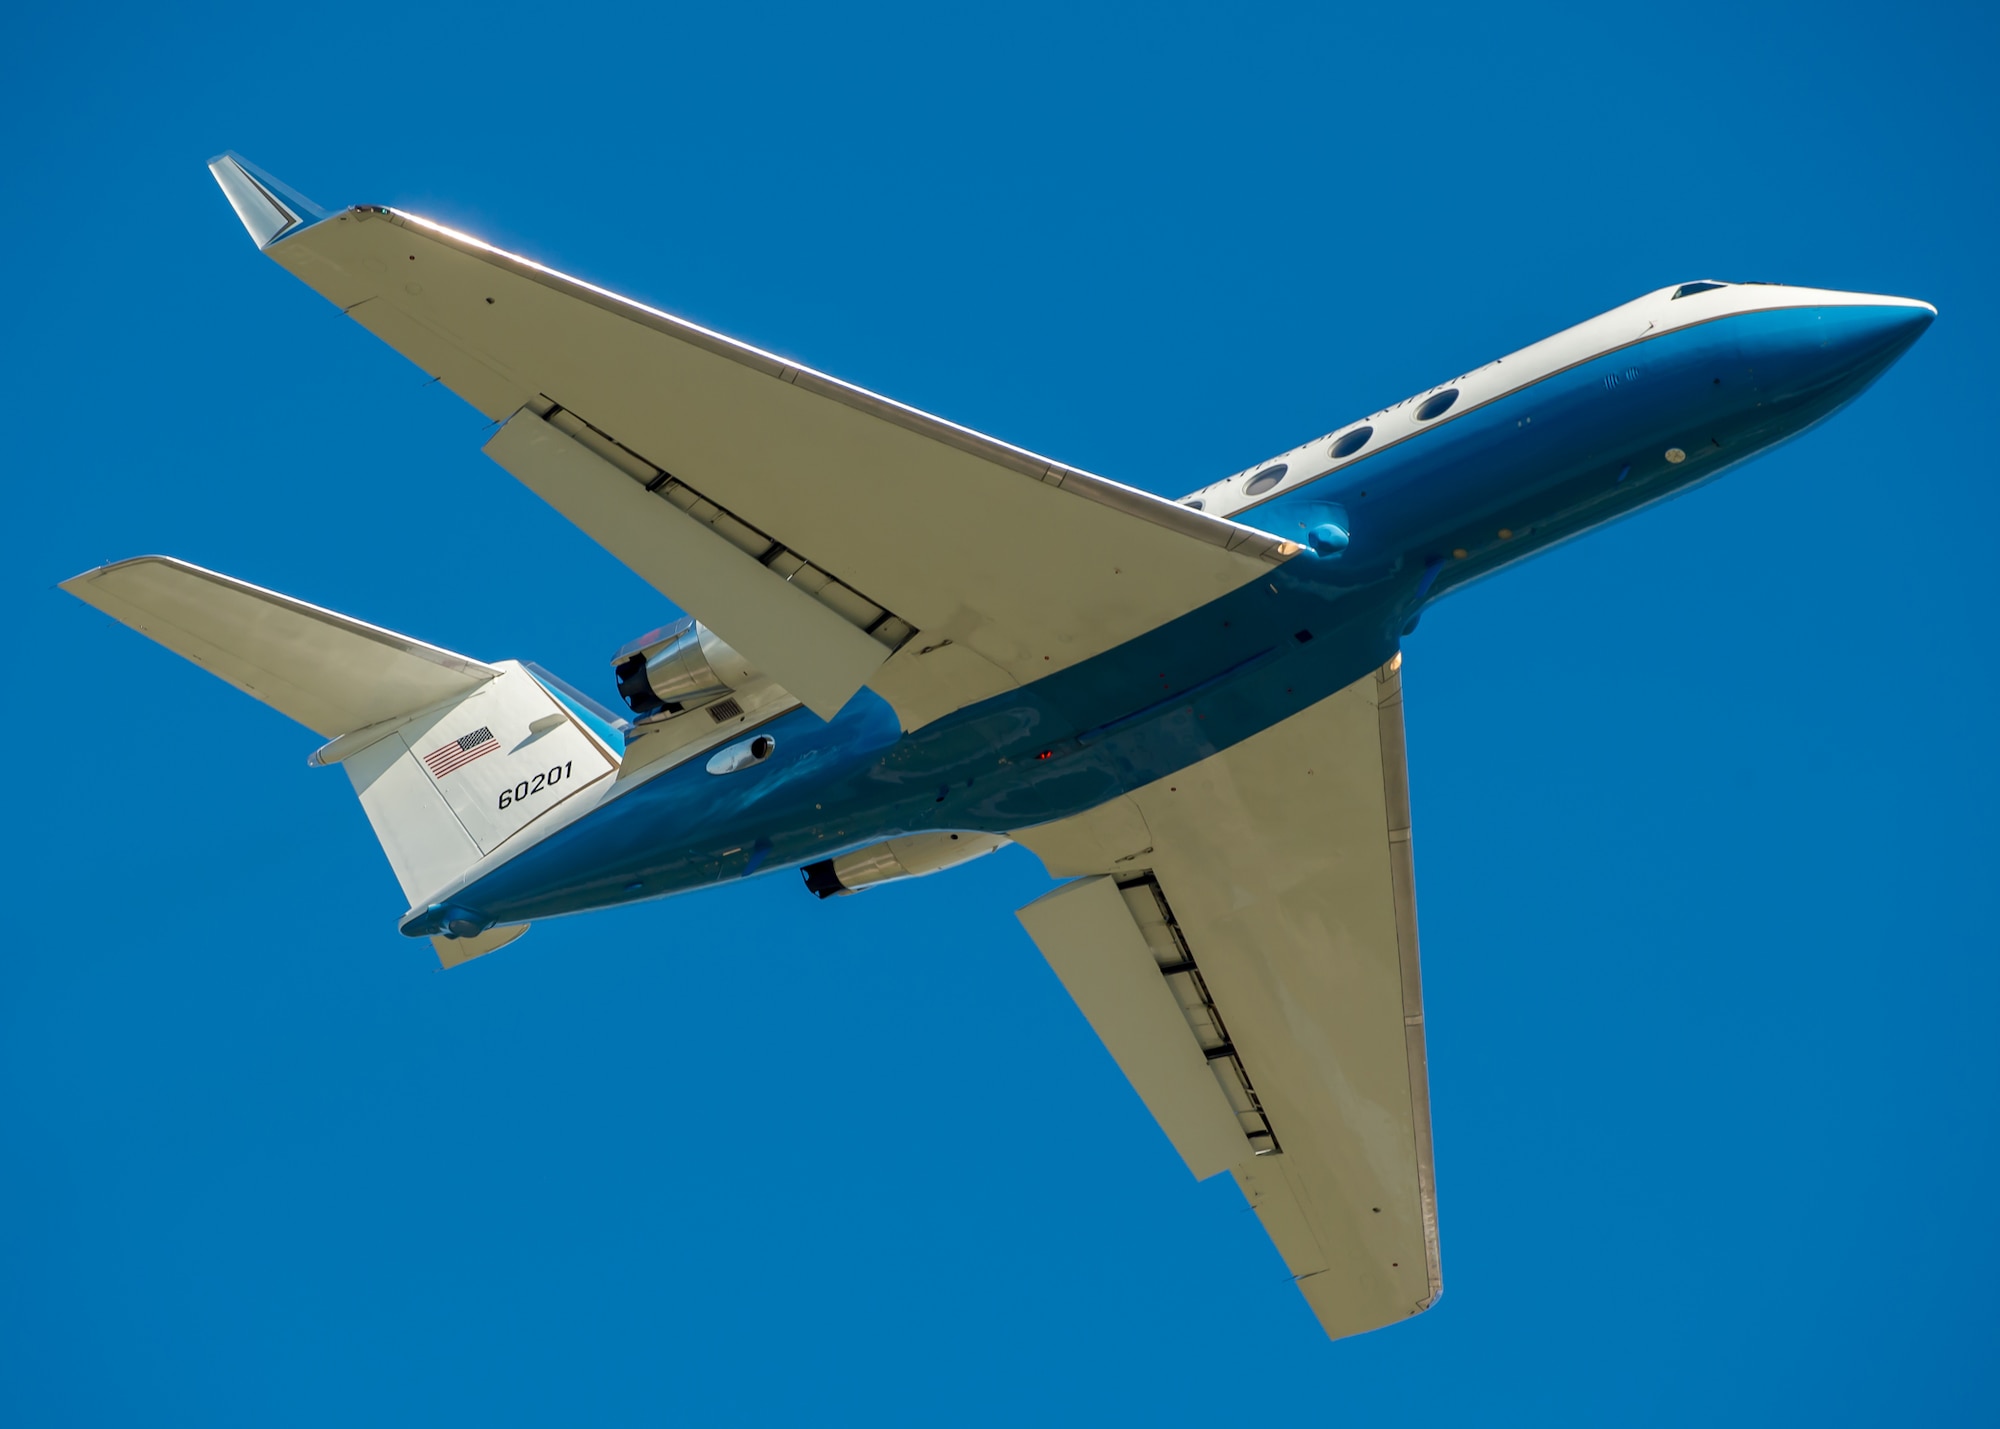 DAYTON, Ohio -- Gulfstream Aerospace C-20B at the National Museum of the United States Air Force. (U.S. Air Force photo by Jim Copes)